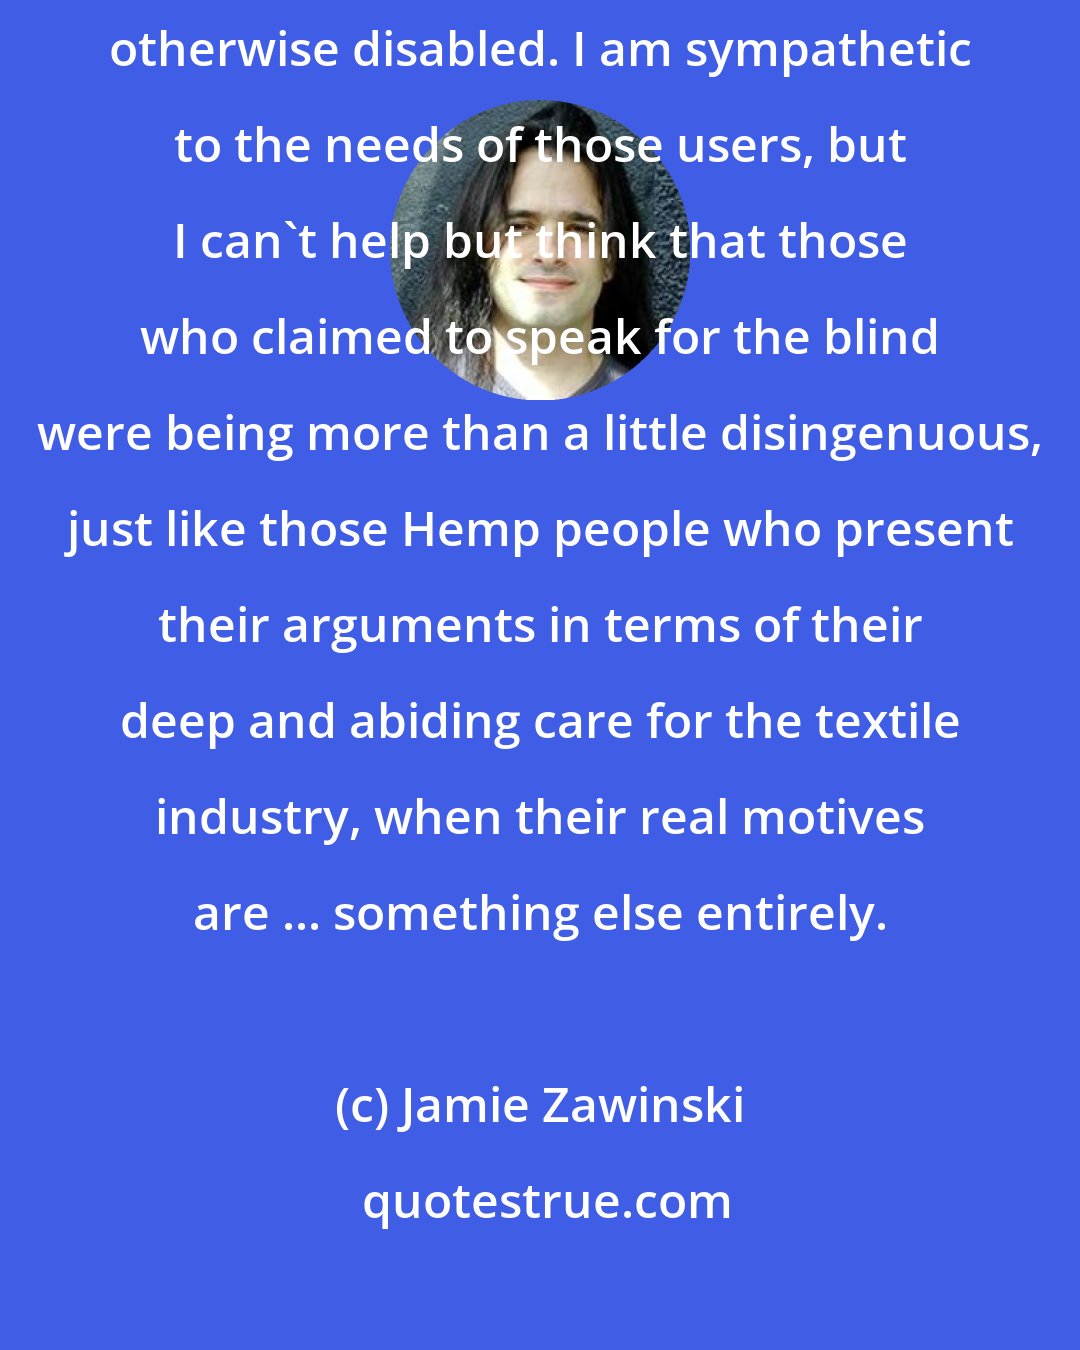 Jamie Zawinski: These people also tended to pretend to care deeply about the blind and otherwise disabled. I am sympathetic to the needs of those users, but I can't help but think that those who claimed to speak for the blind were being more than a little disingenuous, just like those Hemp people who present their arguments in terms of their deep and abiding care for the textile industry, when their real motives are ... something else entirely.